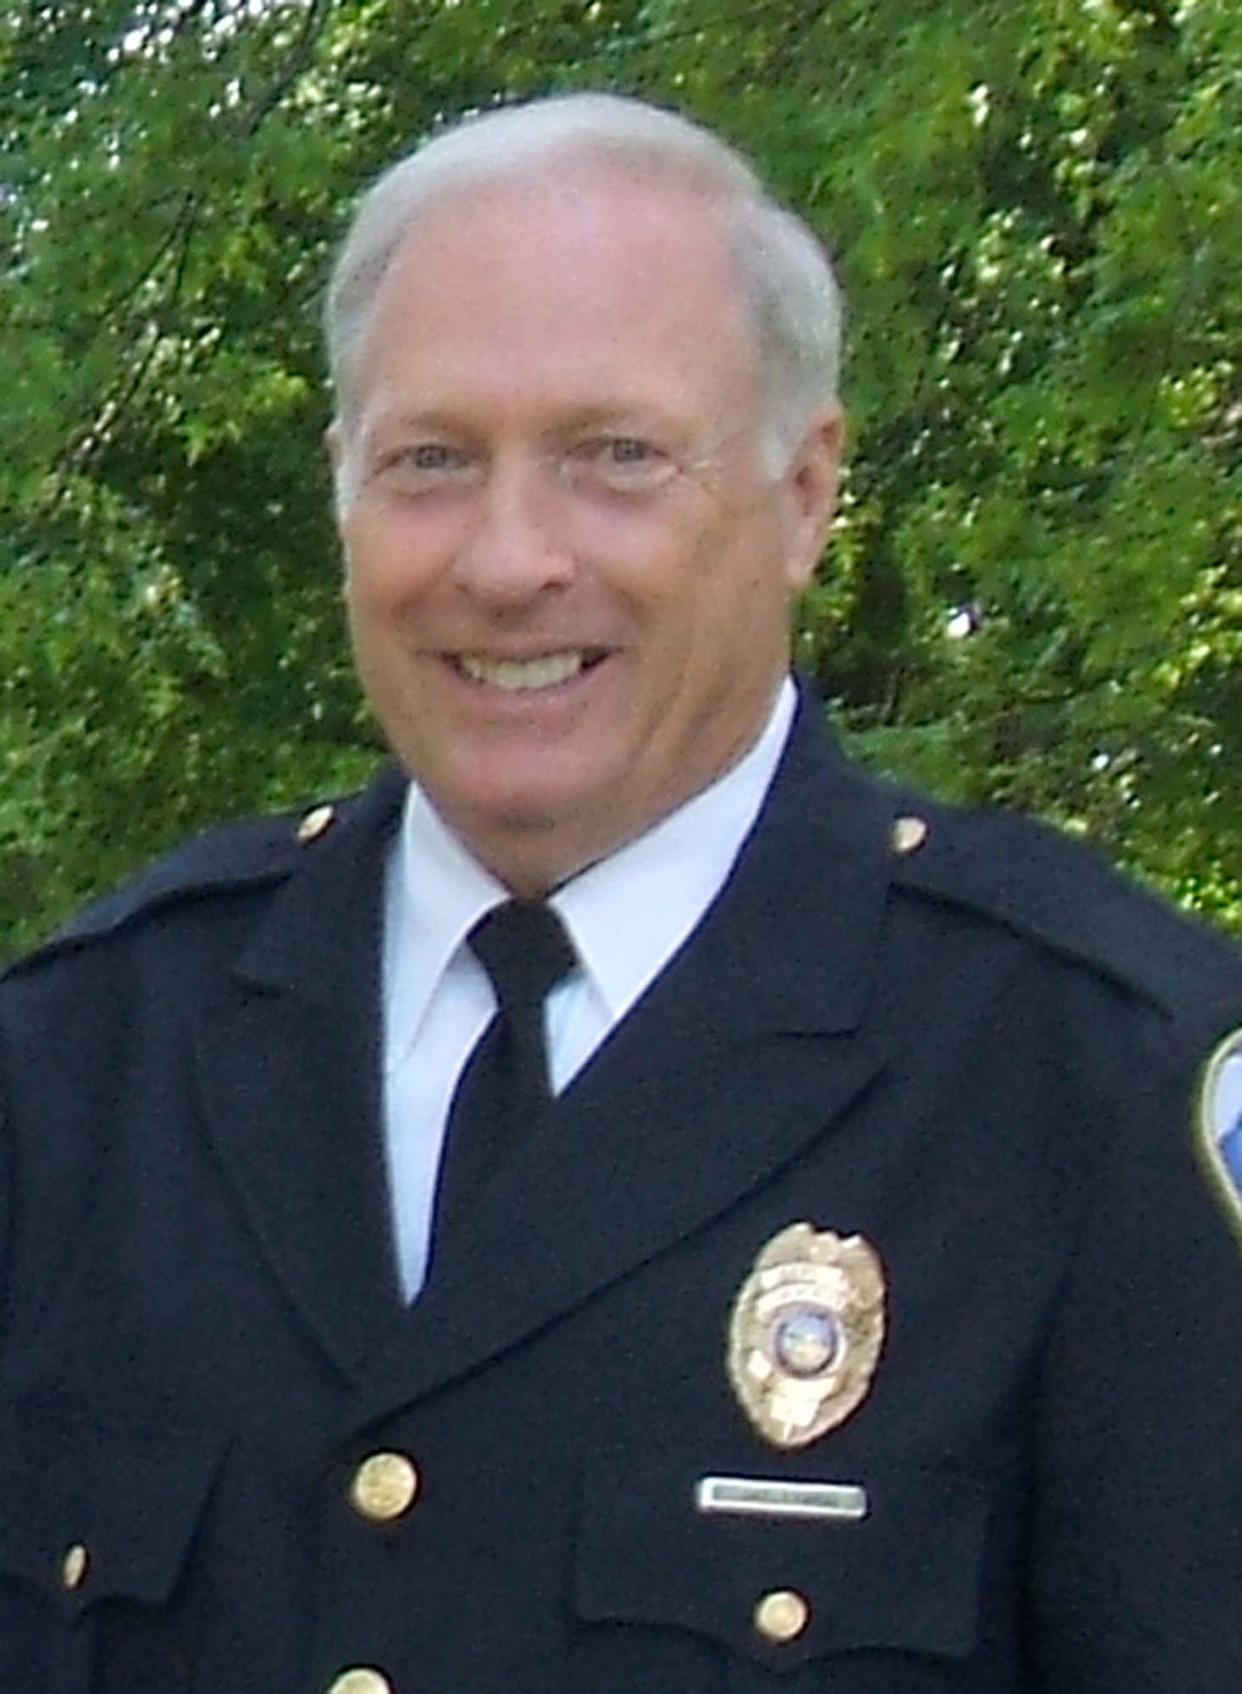 Akron Police Sgt. Tom Dye takes a portrait before his retirement in 2010.